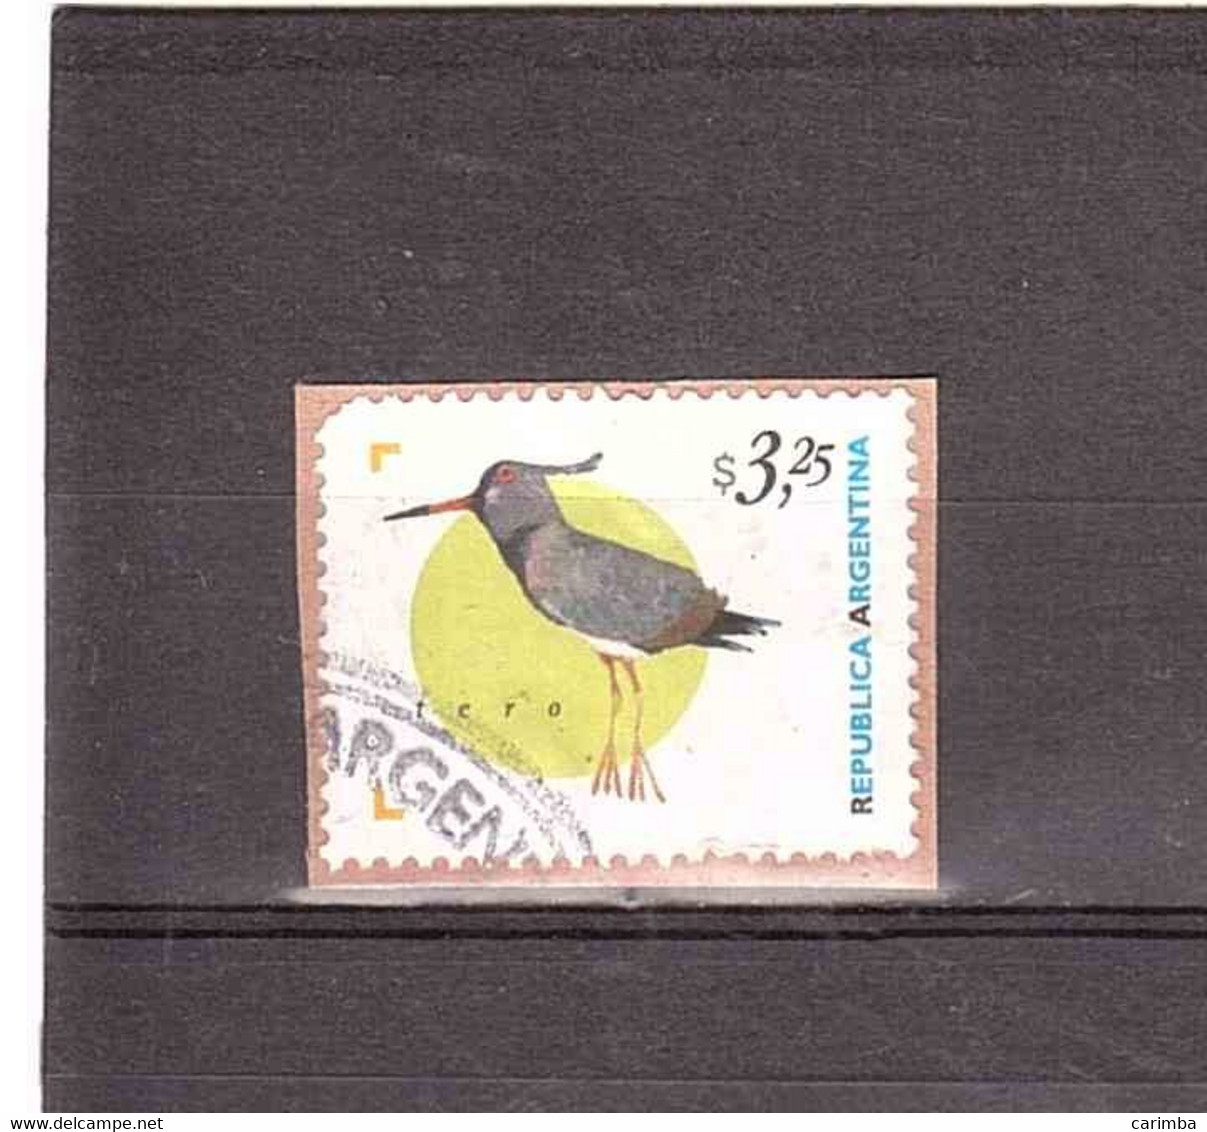 ARGENTINA $3,25 TERO - Used Stamps